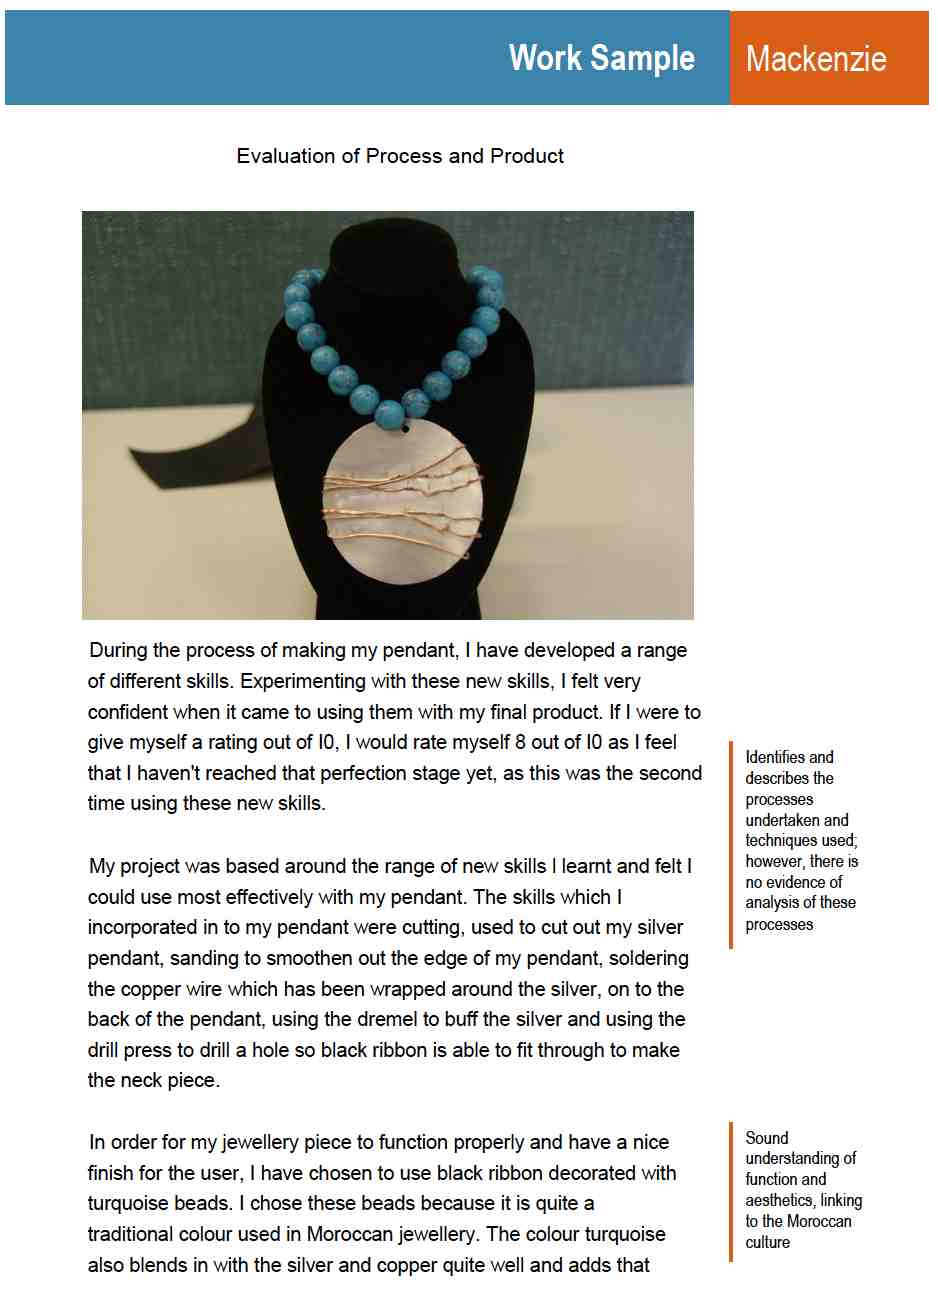 Final product and evaluation of a jewellery project - Mackenzie